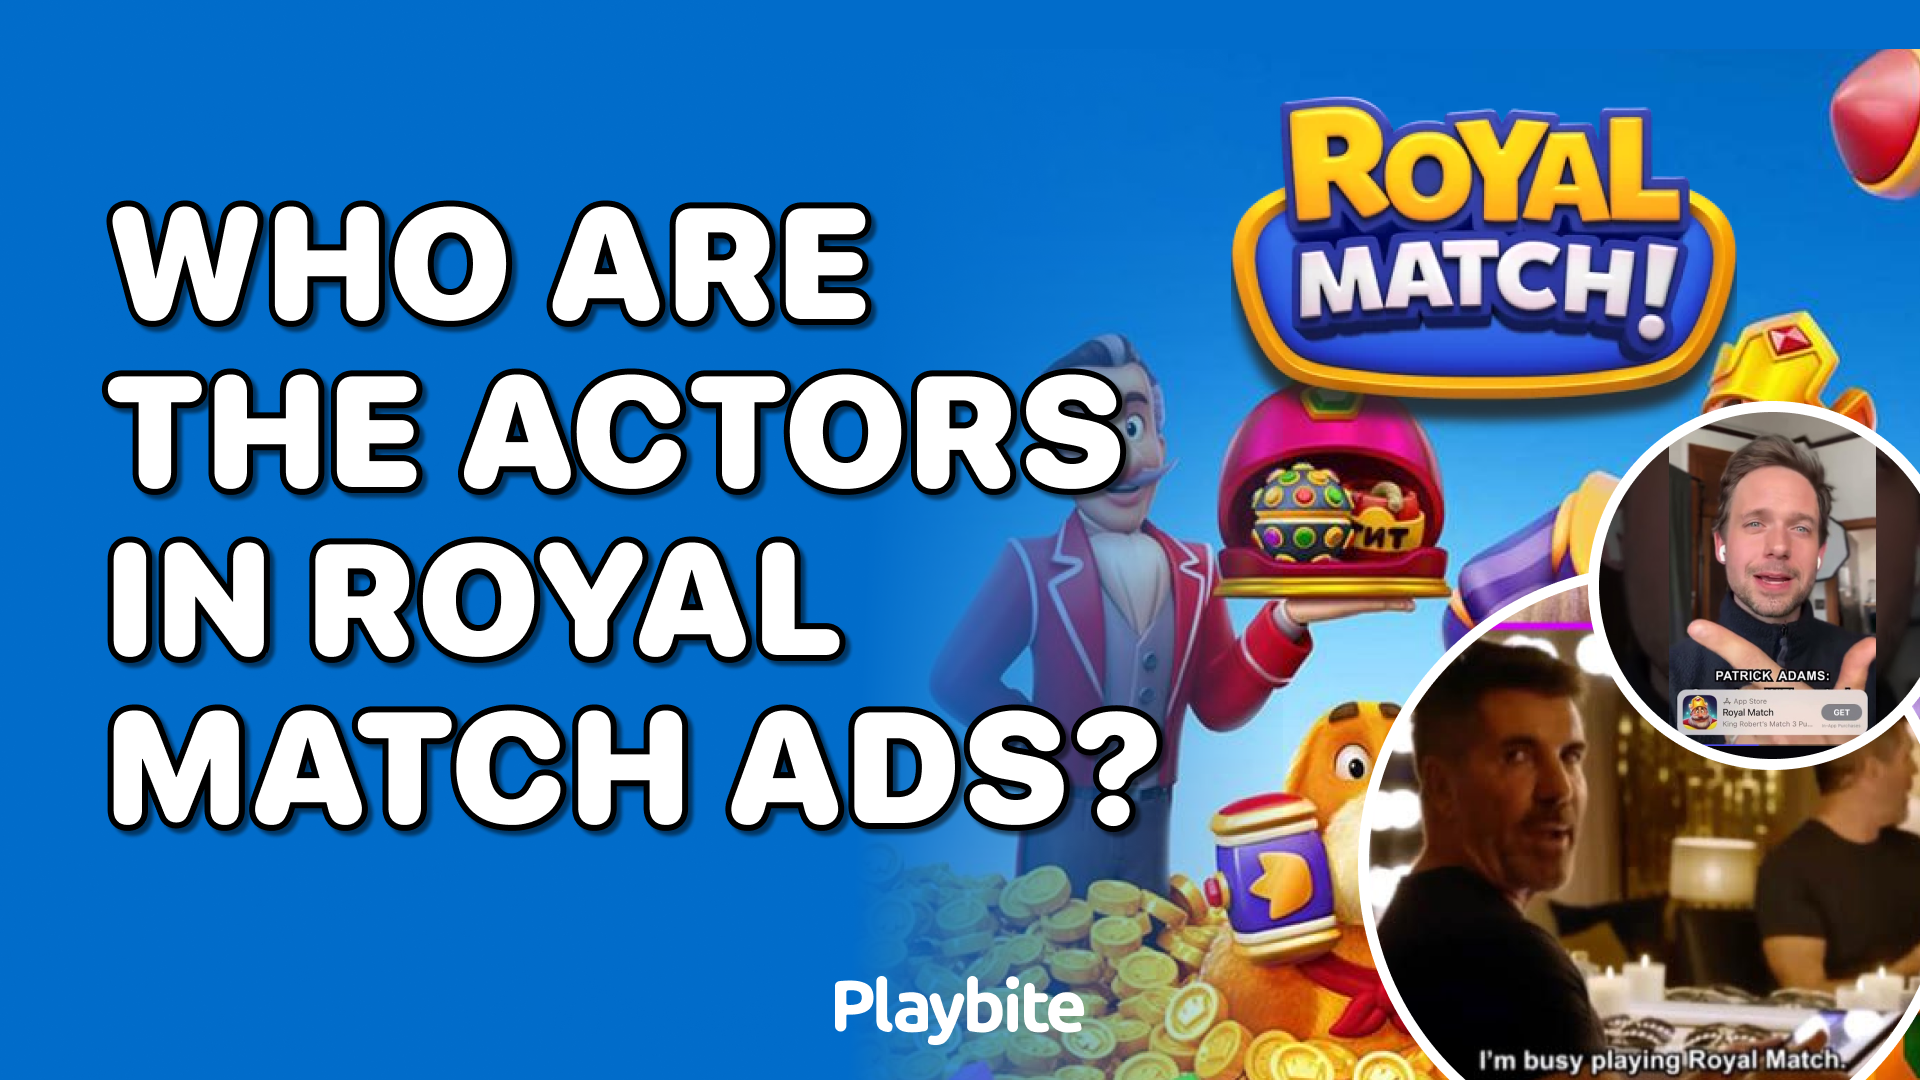 Who Are the Actors in Royal Match Ads?